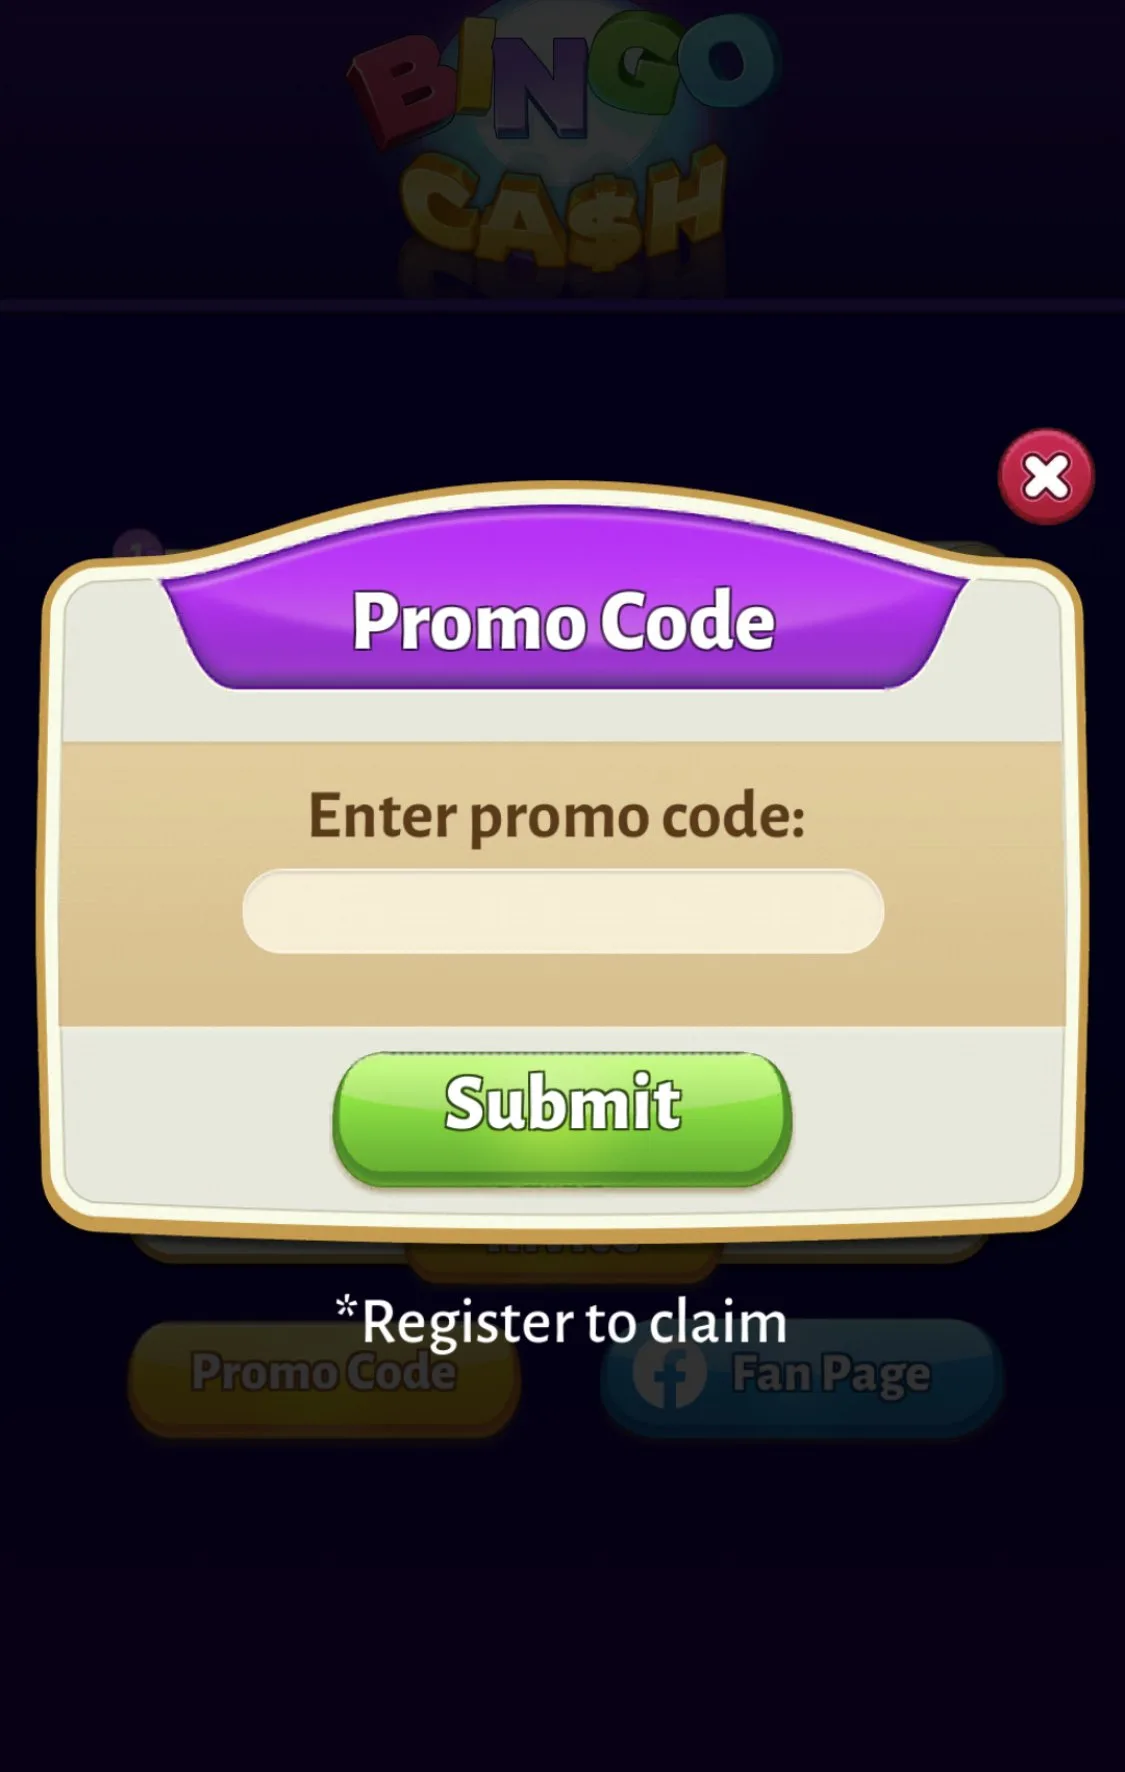 Bingo Cash List of Promo Codes and How To Find More of Them WP